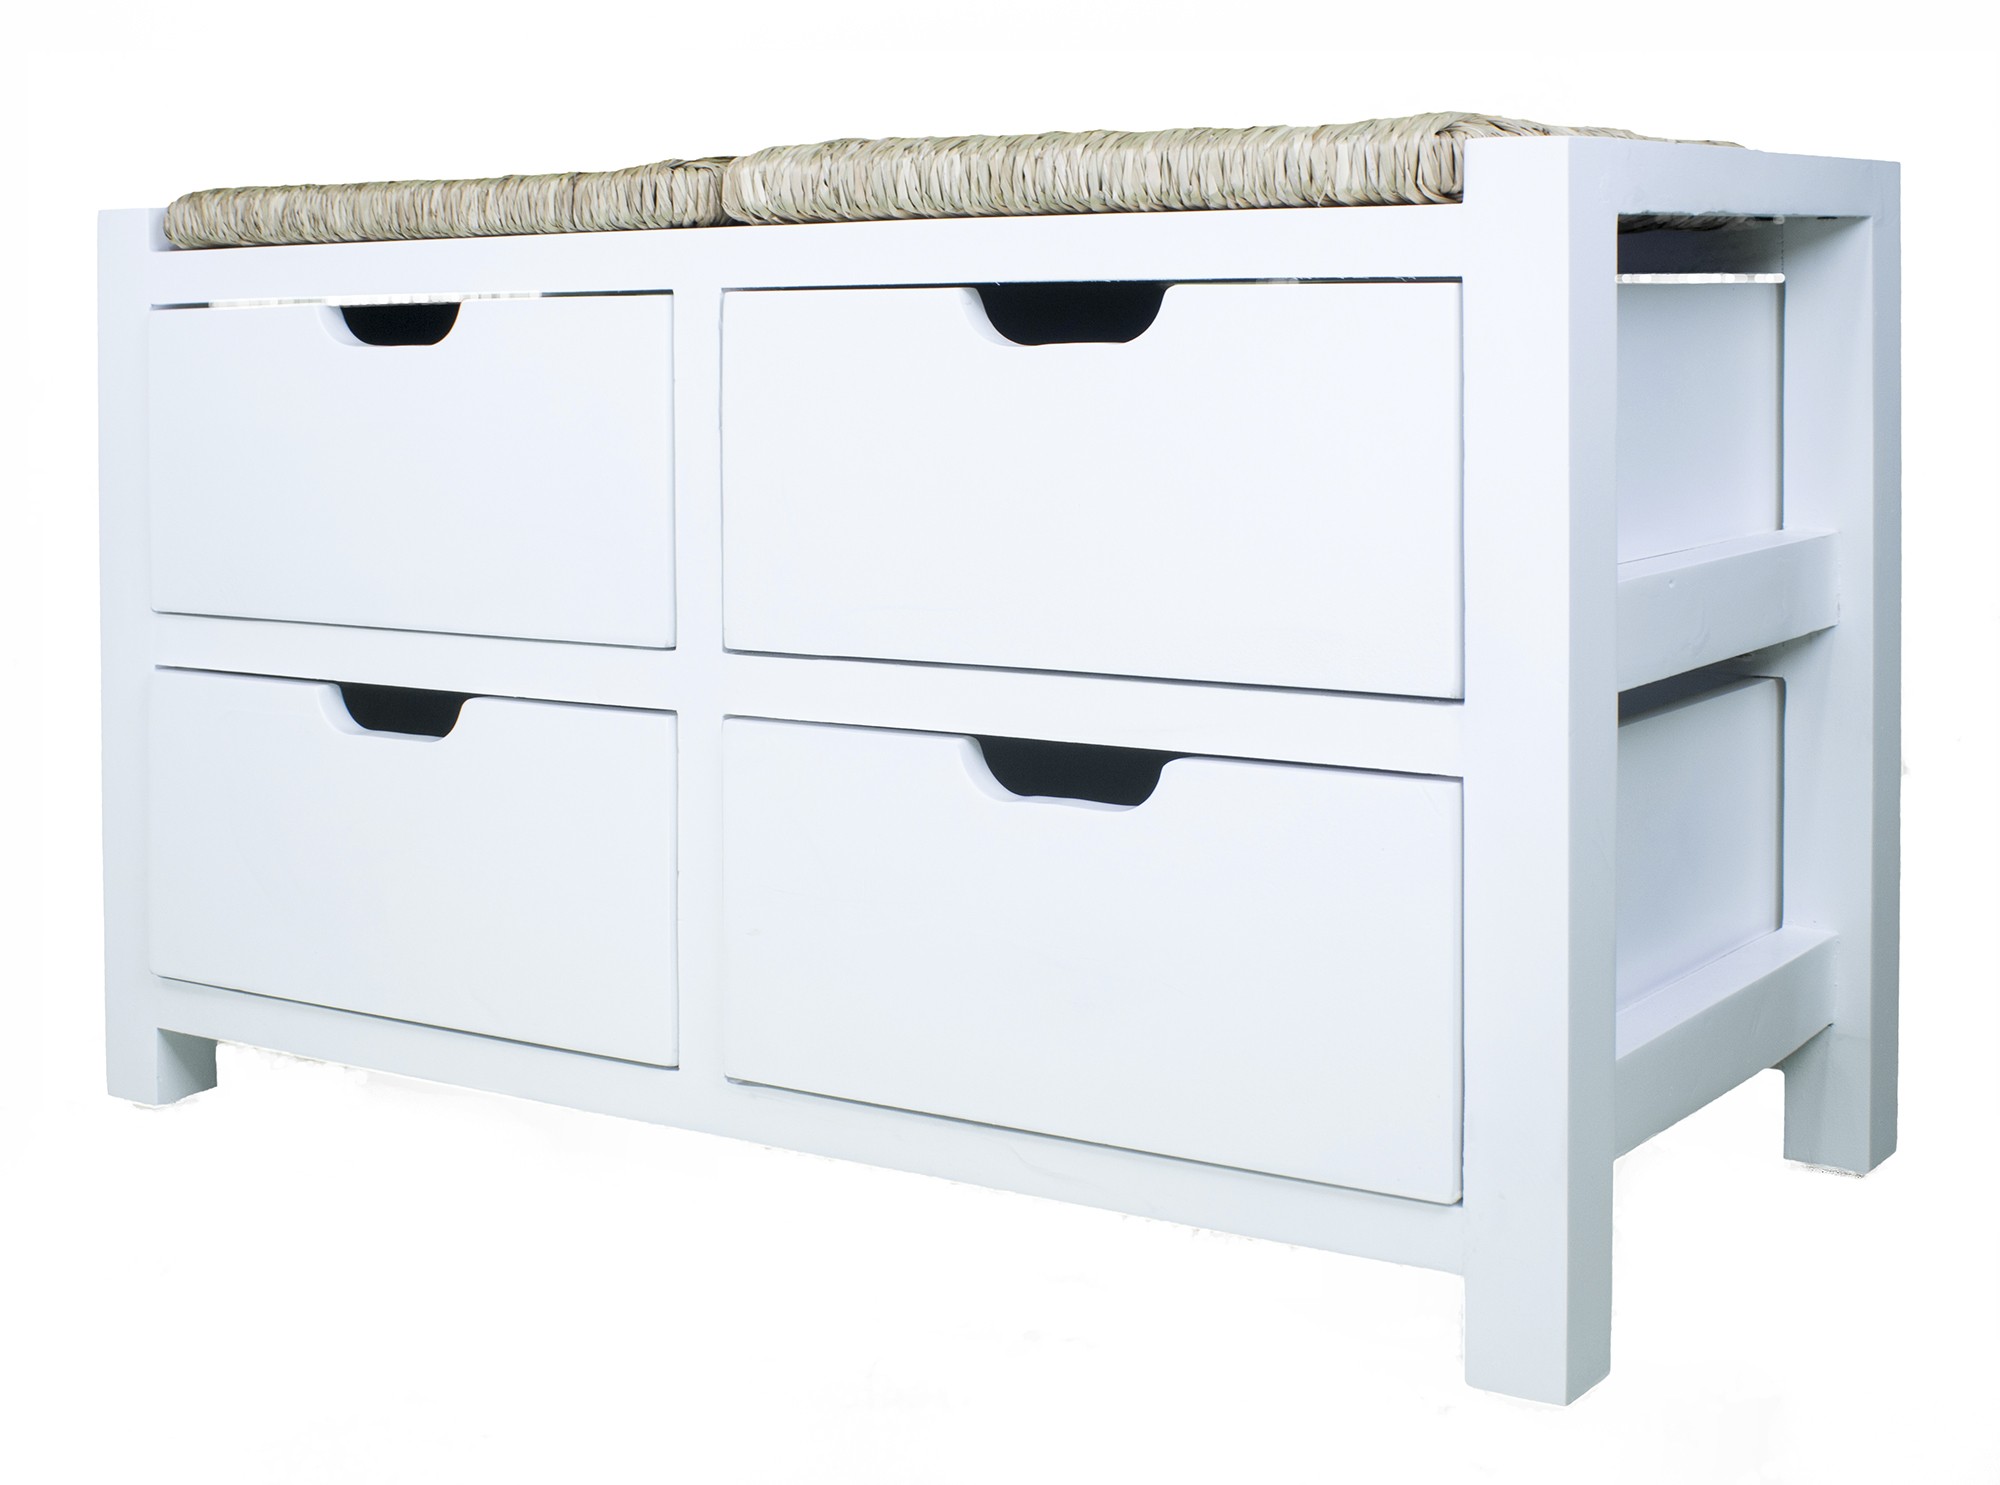 32" X 15" X 21" White W Natural Sea Grass Wood MDF Seagrass Bench with Drawers and a Seagrass Top